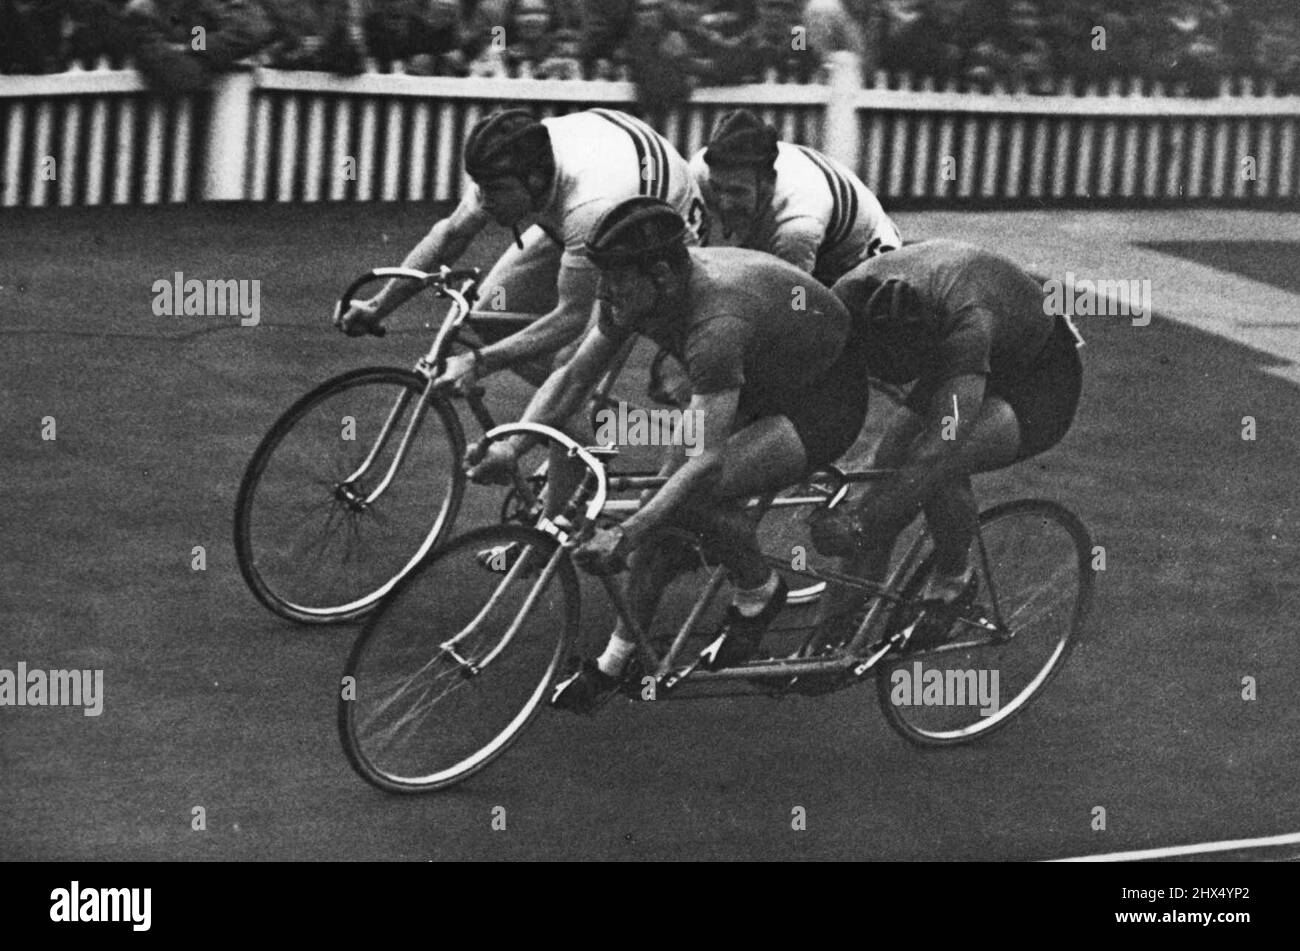 The XIVth Olympiad: Italy beat Great Britain in the 2000 metres Tandem sprint at Herne Hill. Teruzzi and Perona, Italy, nearest camera, pulling away from Harris and Bannister Great Britain, to win two of the three heats in the final of the 2000 tandem sprint. October 08, 1948. (Photo by Sport & General Press Agency, Limited). Stock Photo